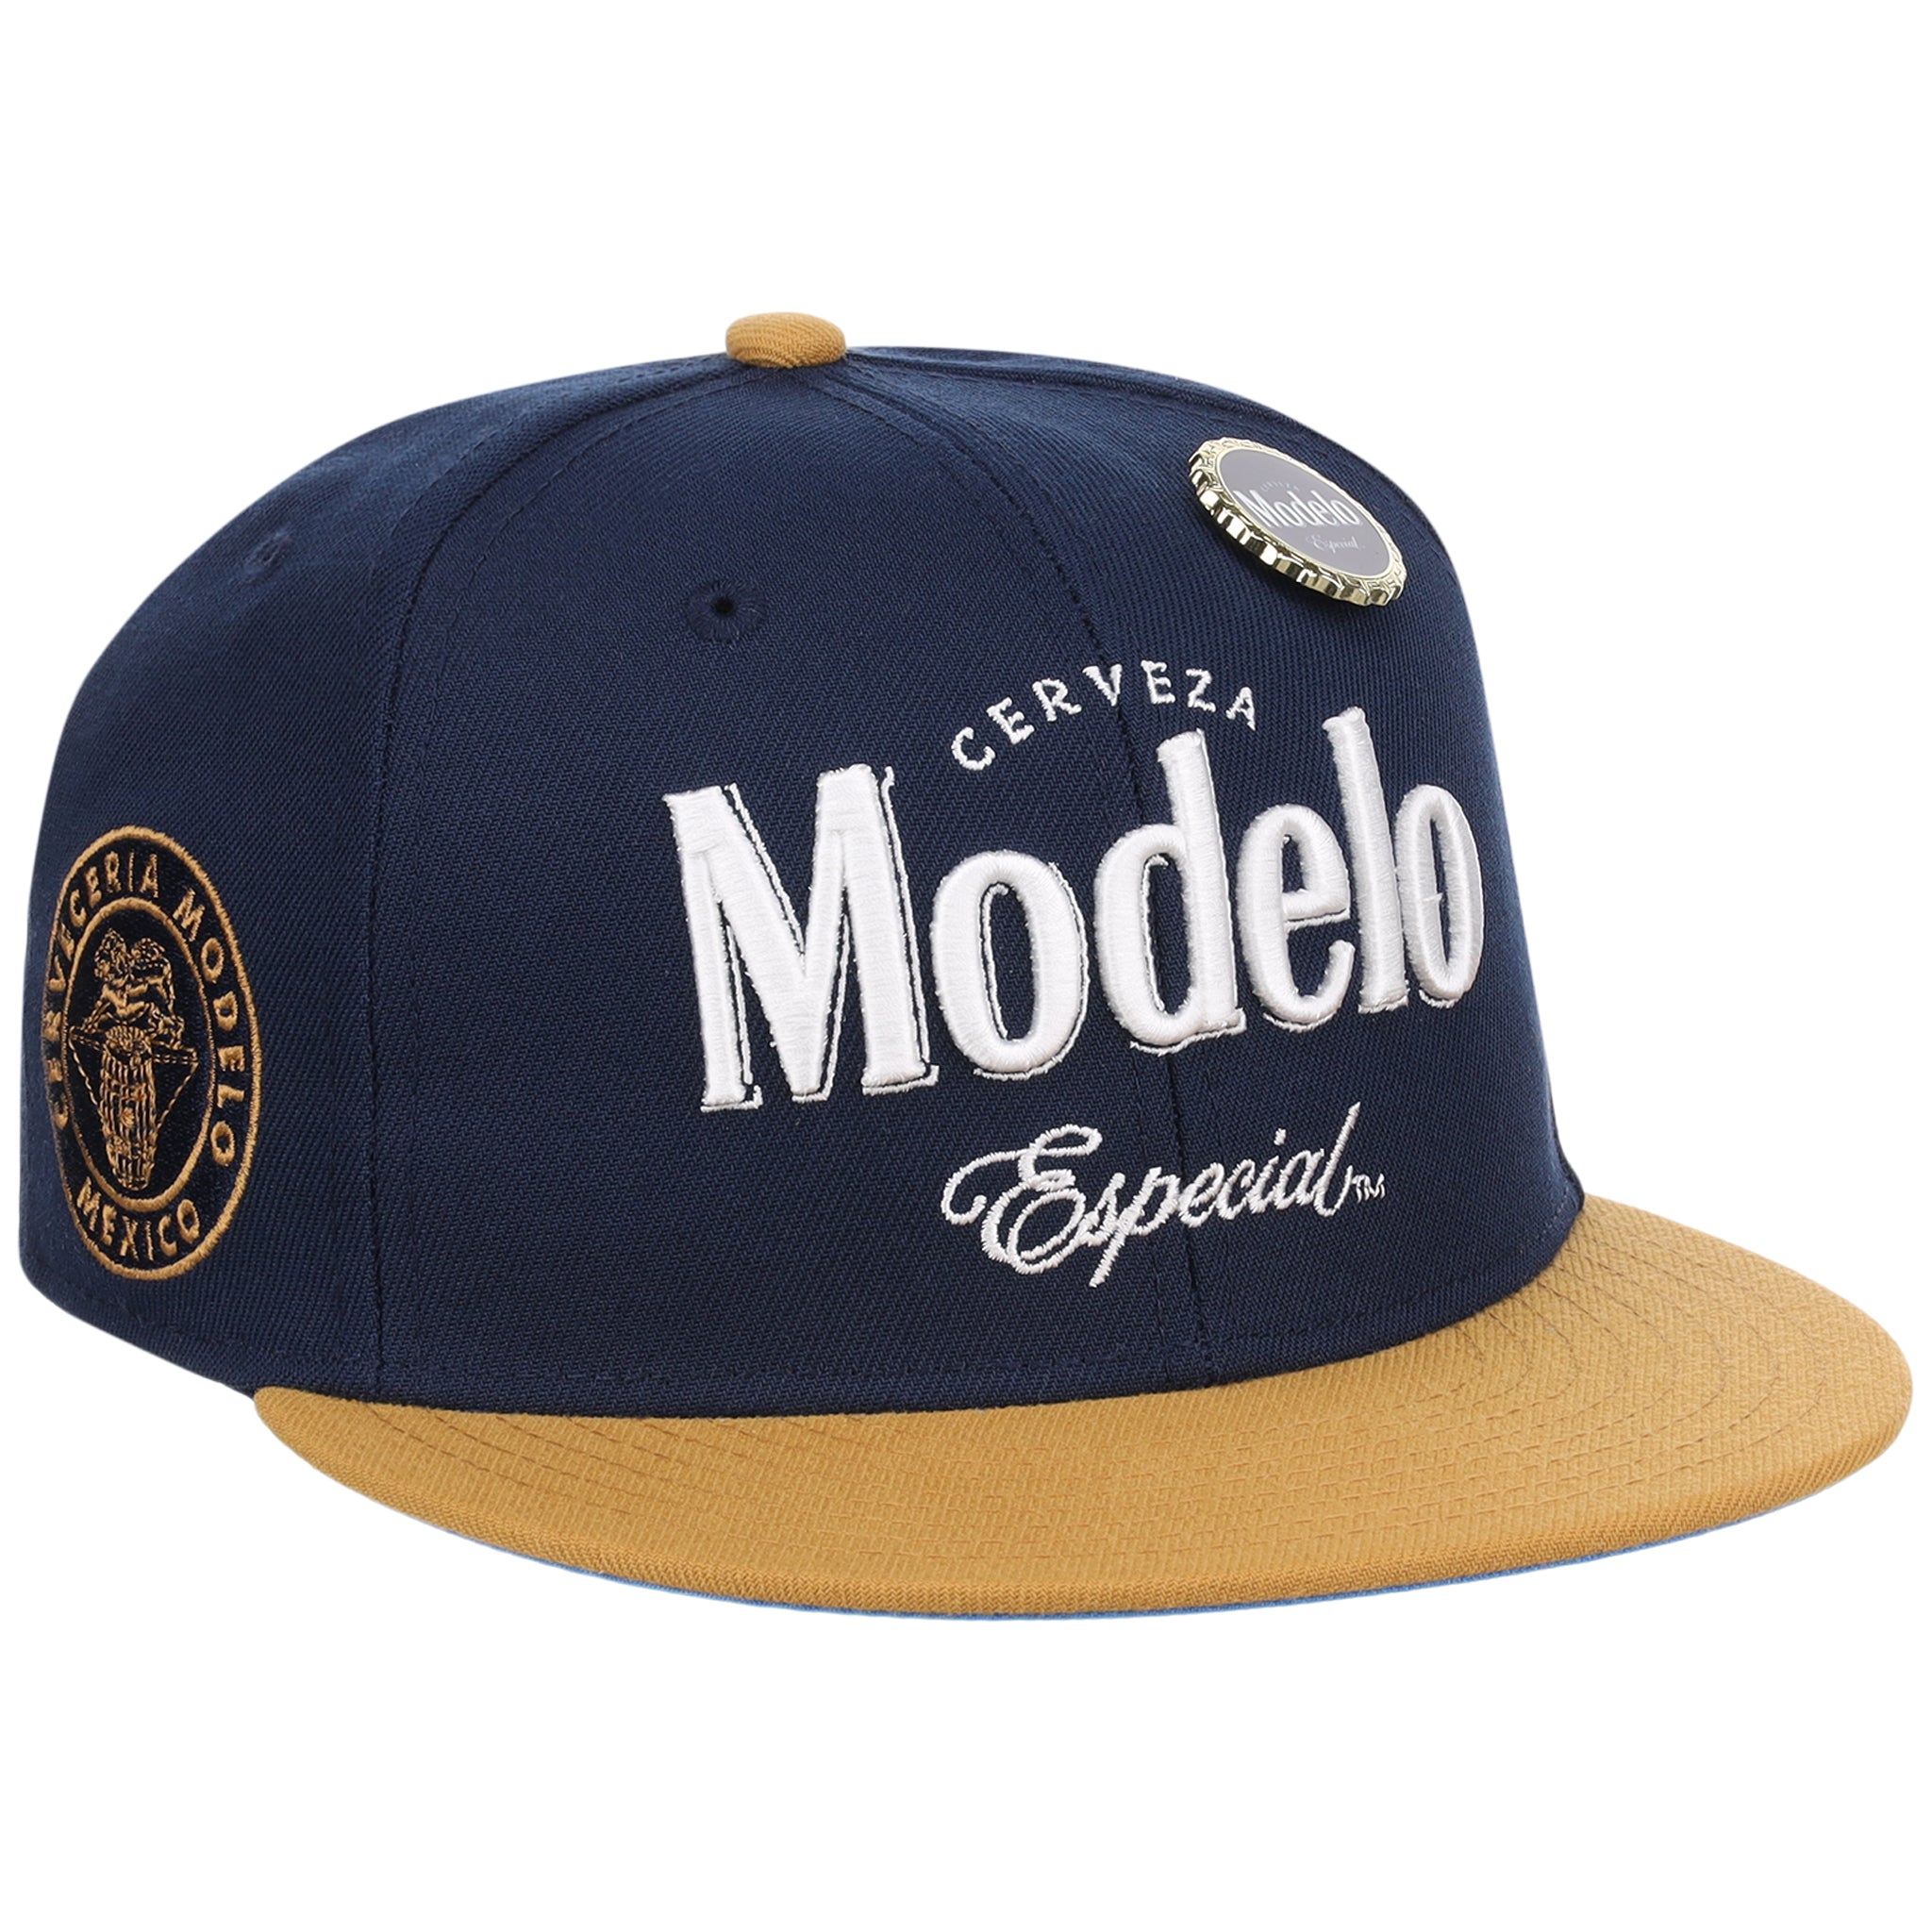 Modelo Mexican Beer Day Fitted